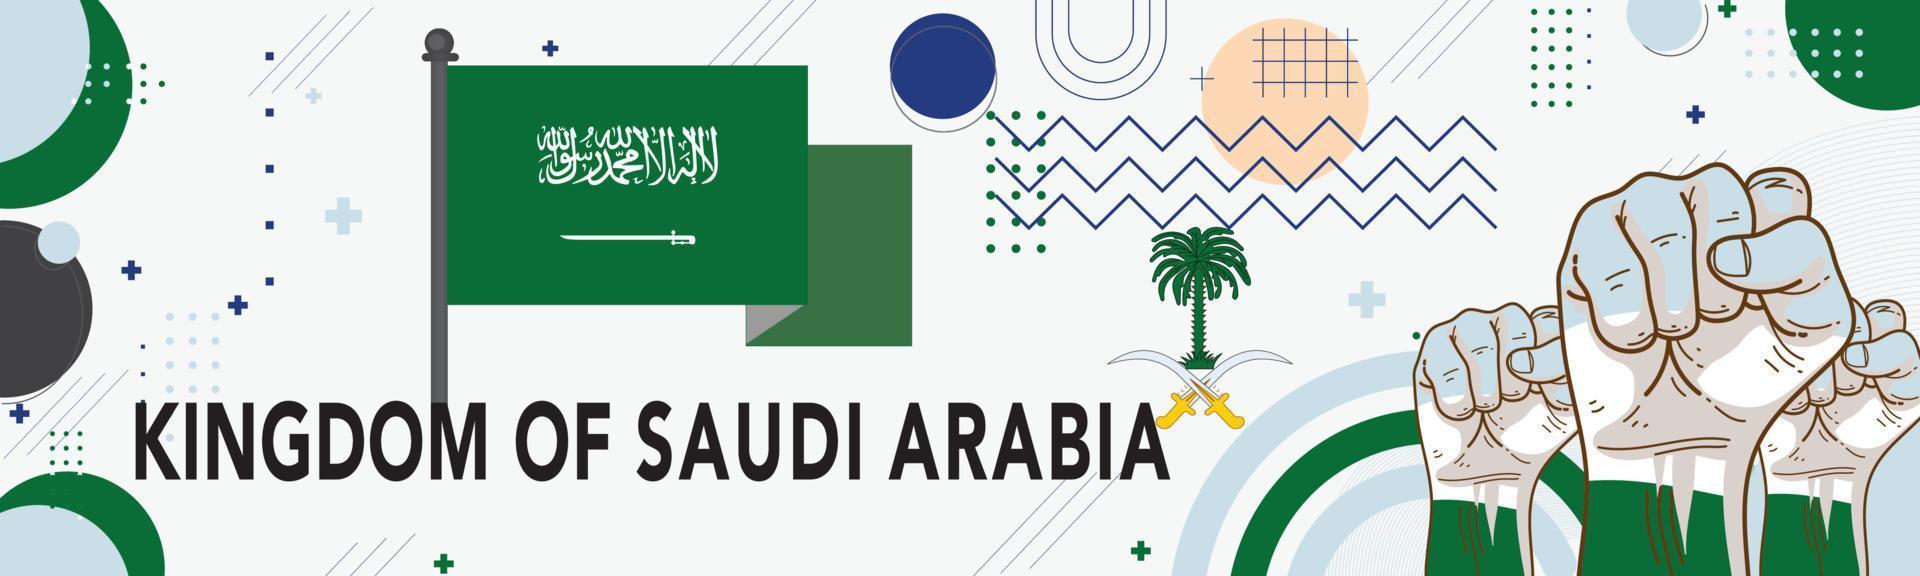 Banner Saudi Arabia Flag and map with raised fists. National day or Independence day Culture banner. Modern design with green abstract theme. Arabic calligraphy stating Kingdom of Saudi Arabia. vector